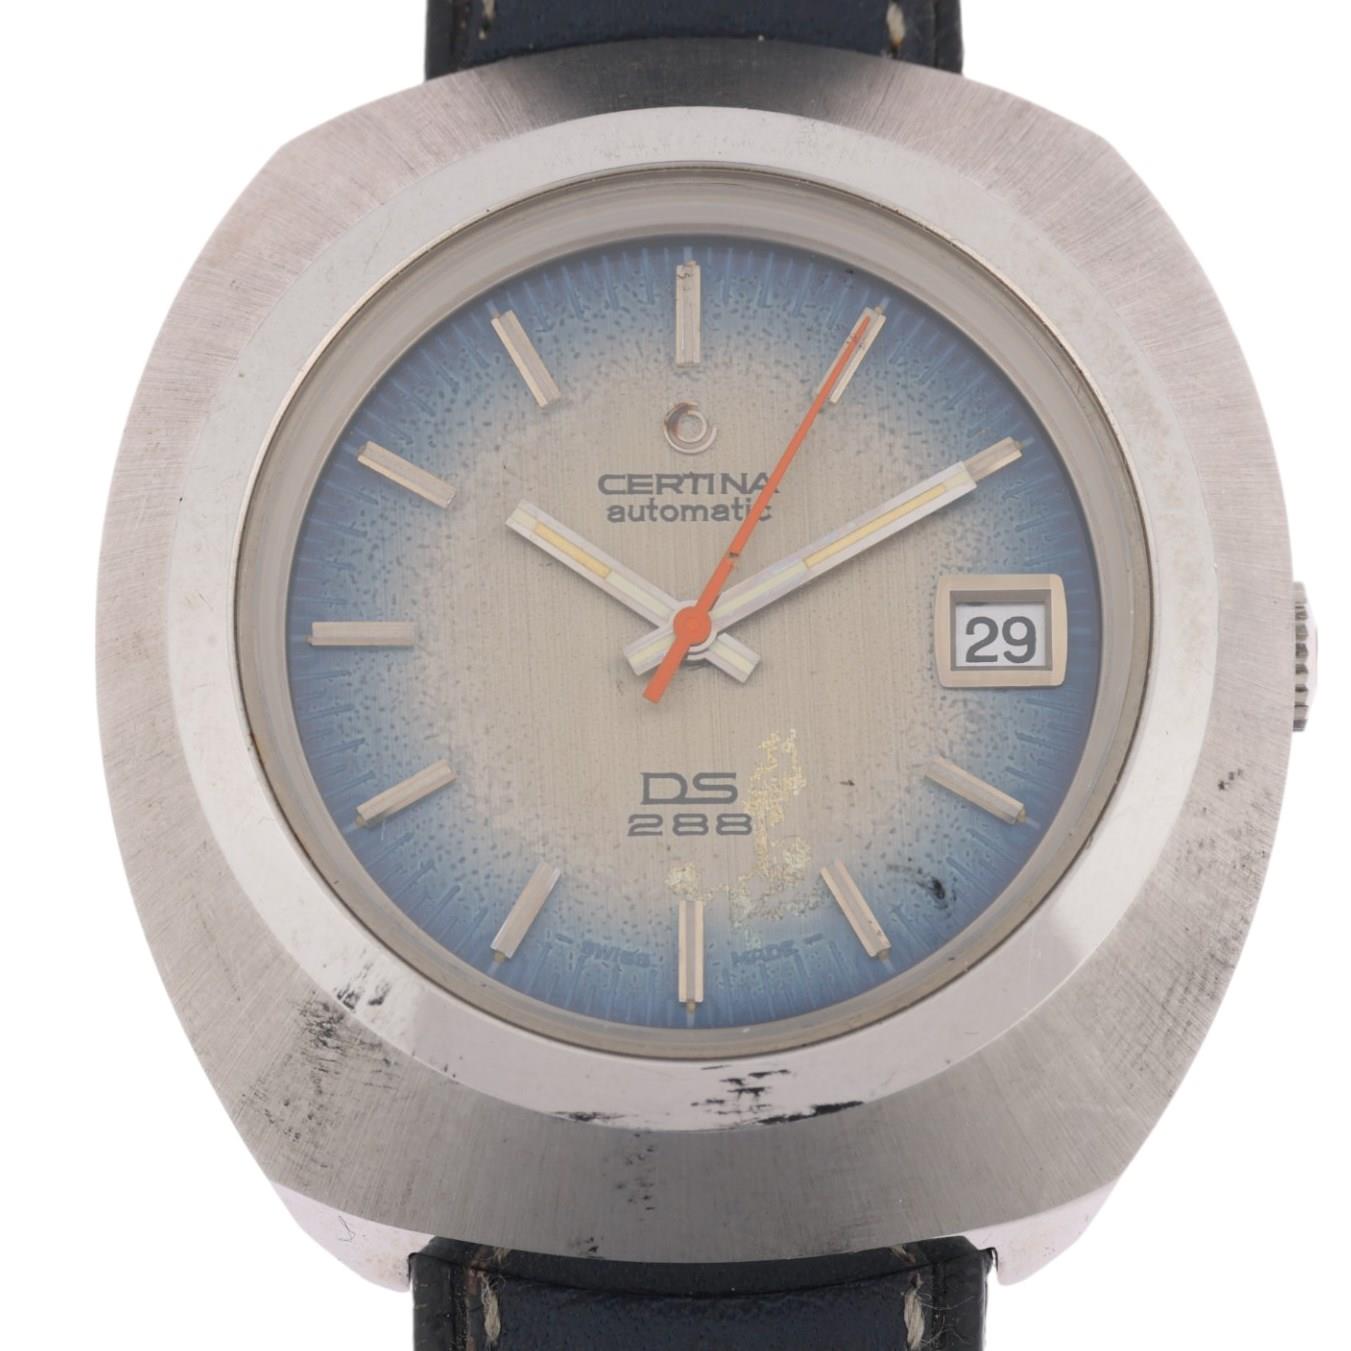 CERTINA - a Vintage stainless steel DS 288 automatic calendar wristwatch, circa 1970s, ombre blue